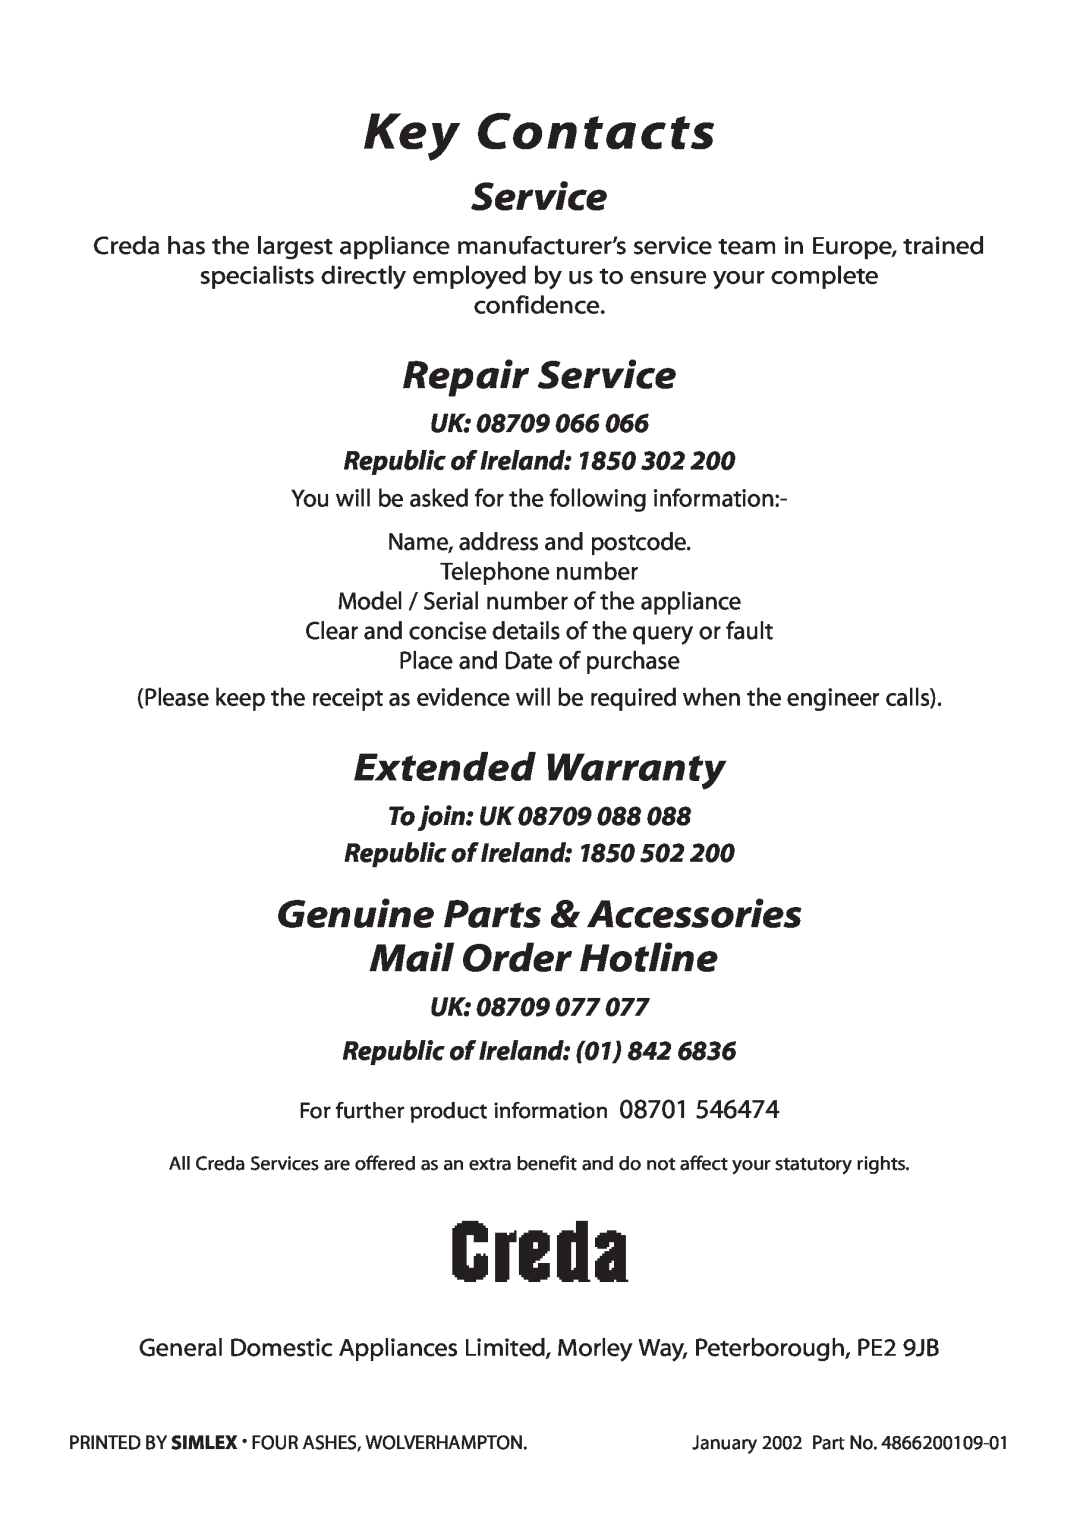 Creda D130E manual Key Contacts, Repair Service, Extended Warranty, Genuine Parts & Accessories Mail Order Hotline 